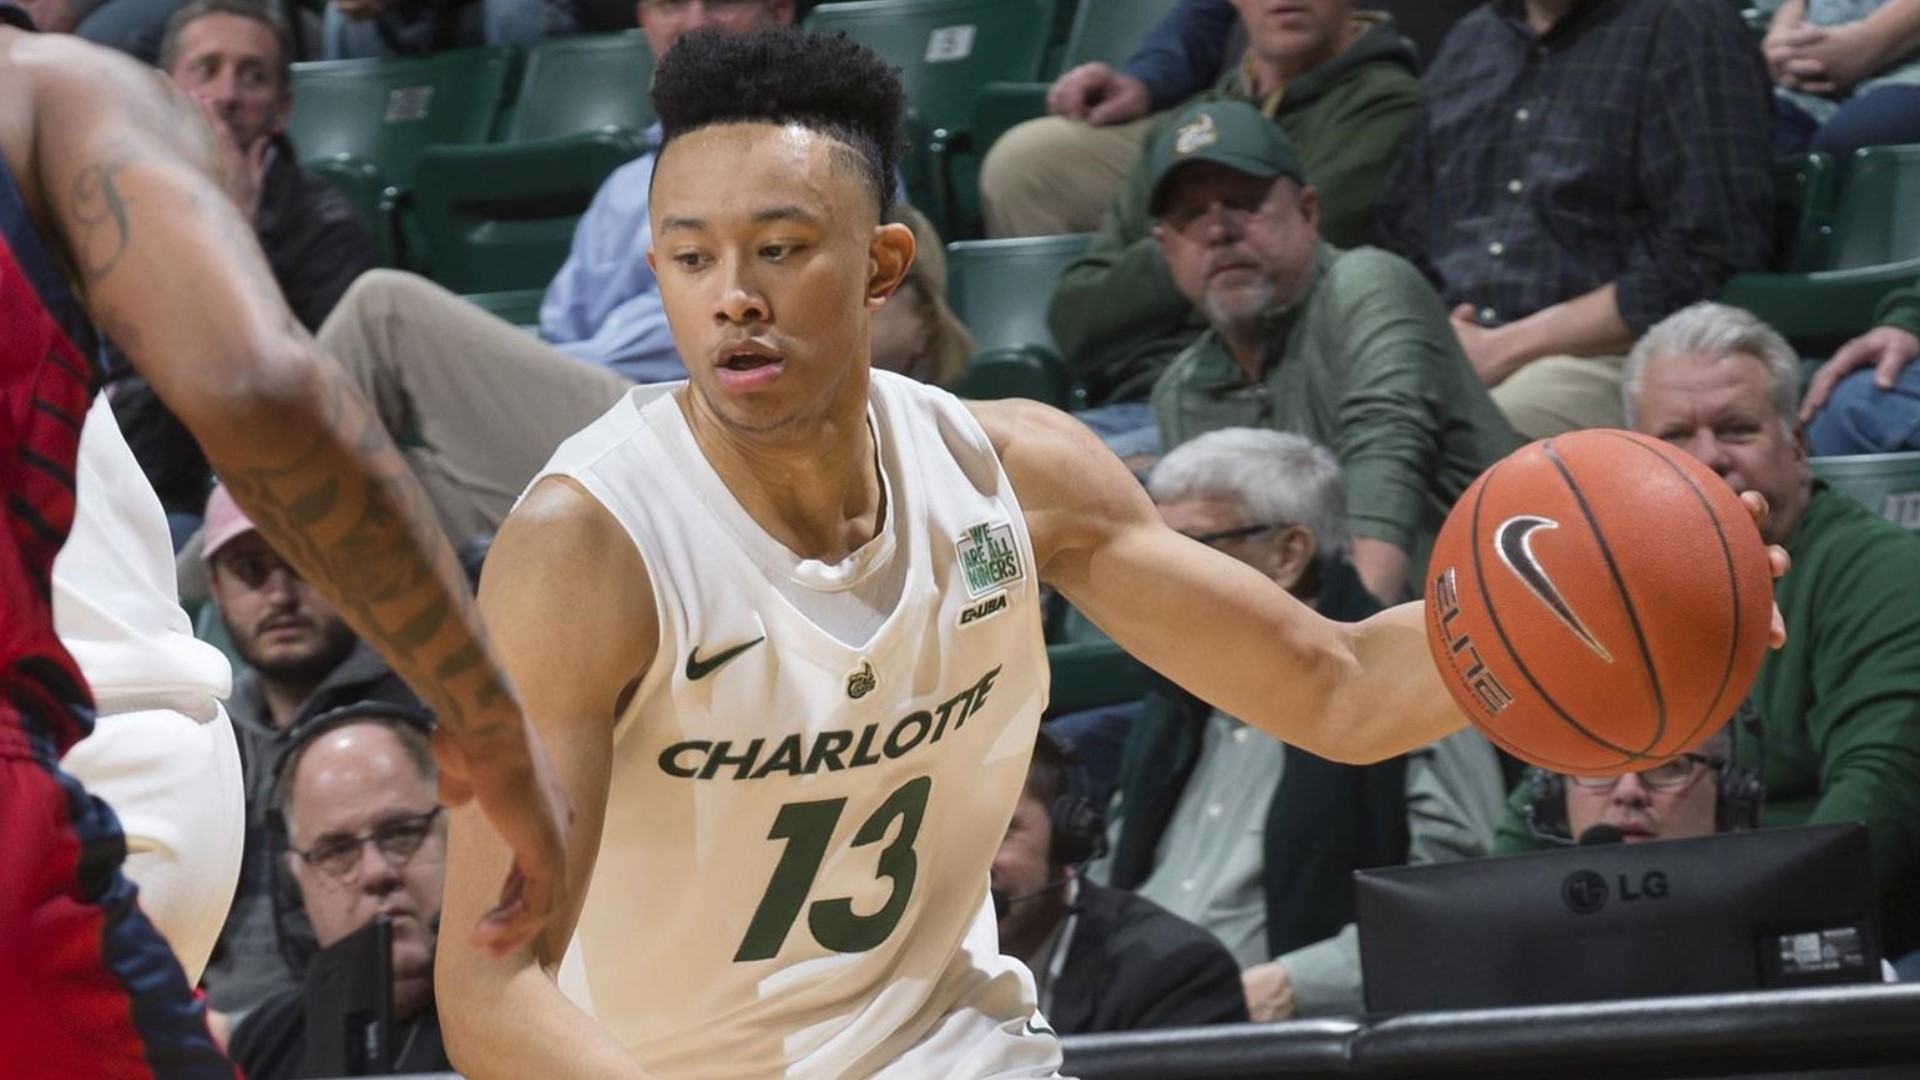 Jahmir Young scored 19 points to lead Charlotte over Florida International 75-49 on Saturday for its seventh straight win at home.